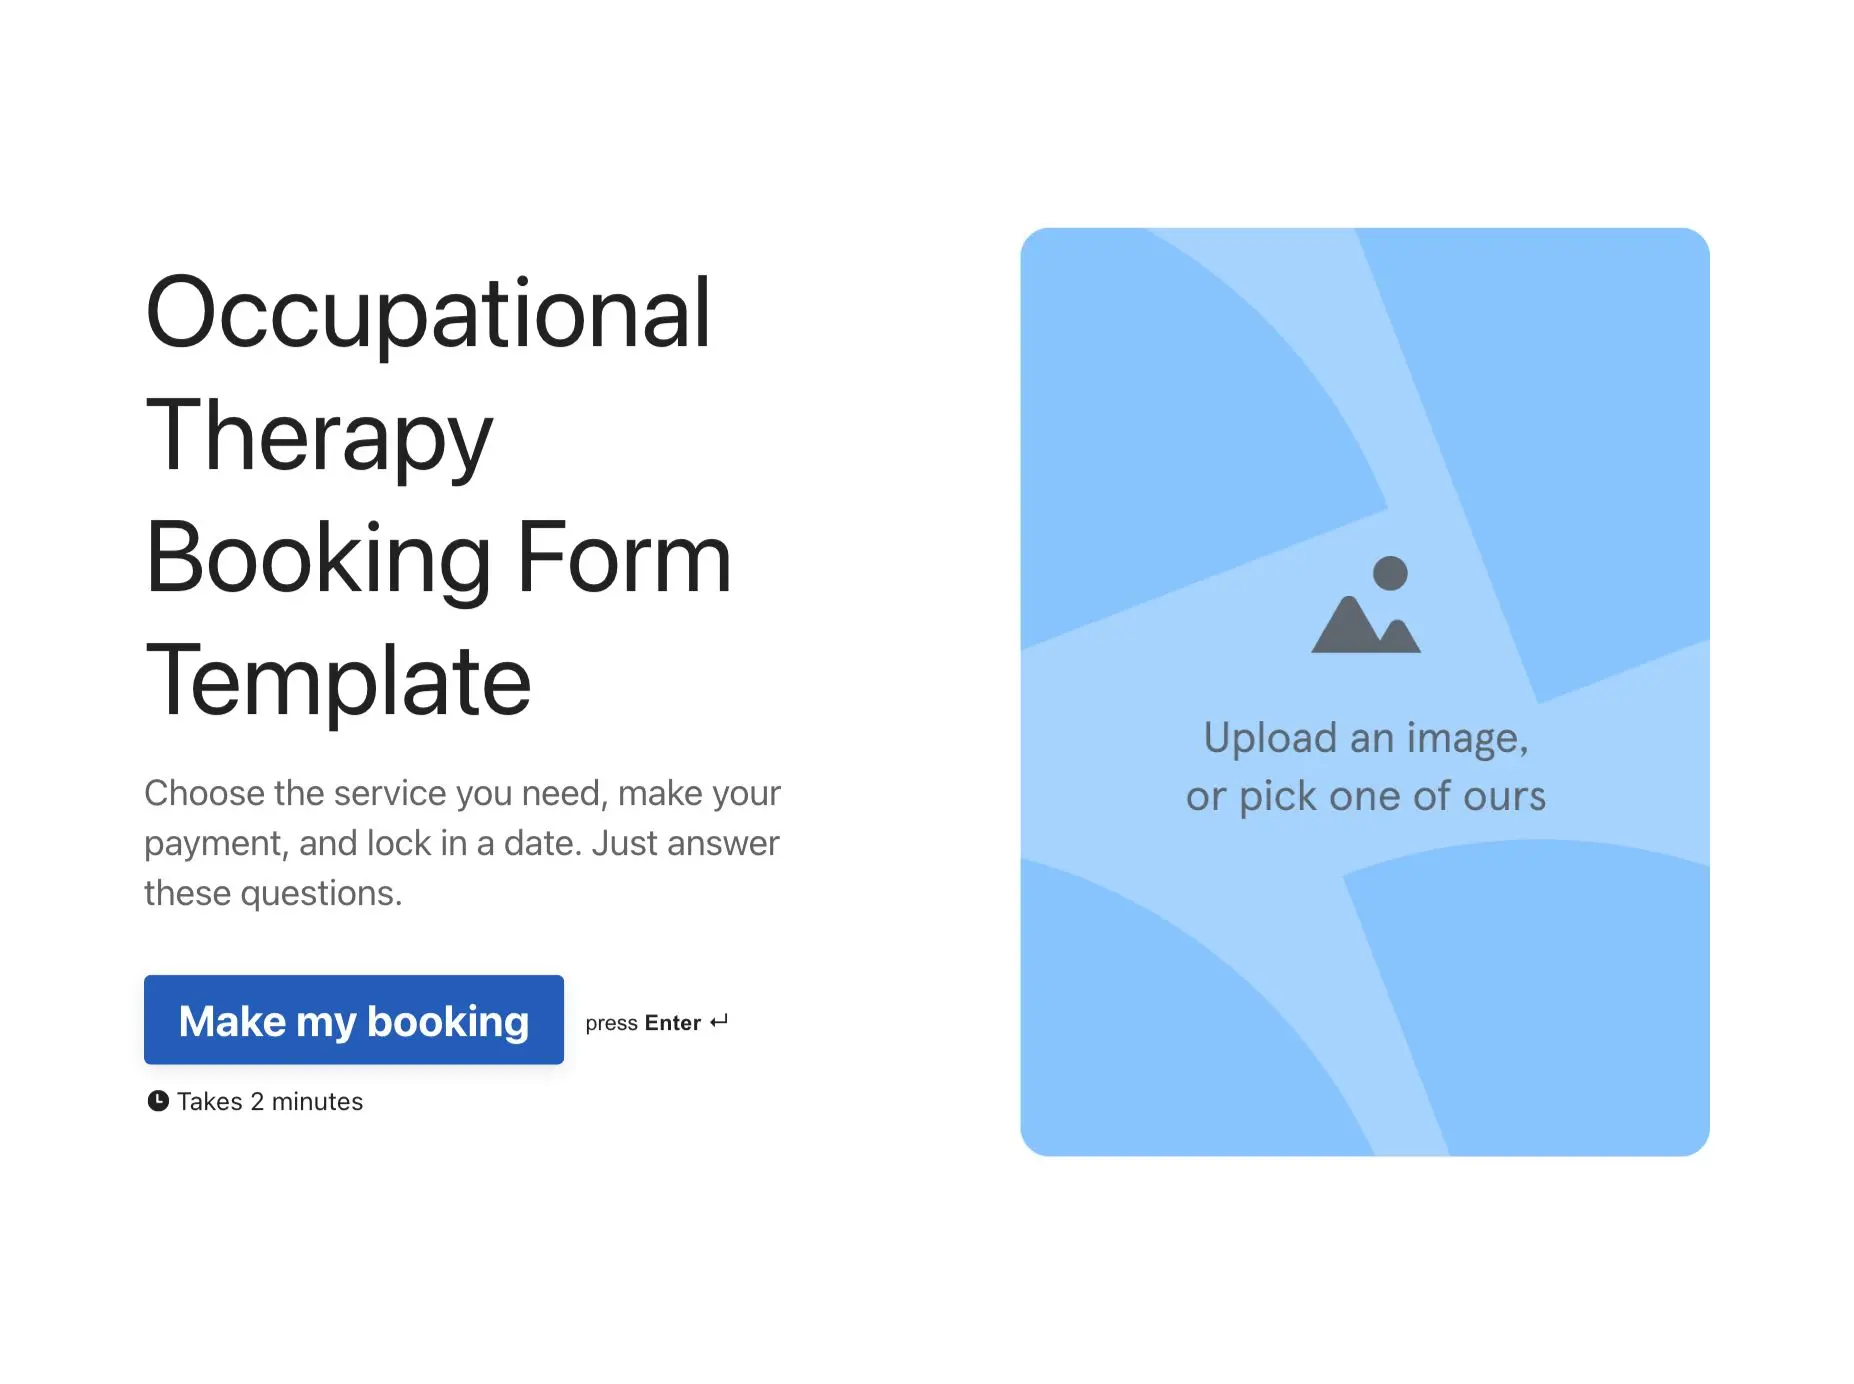 Occupational Therapy Booking Form Template Hero